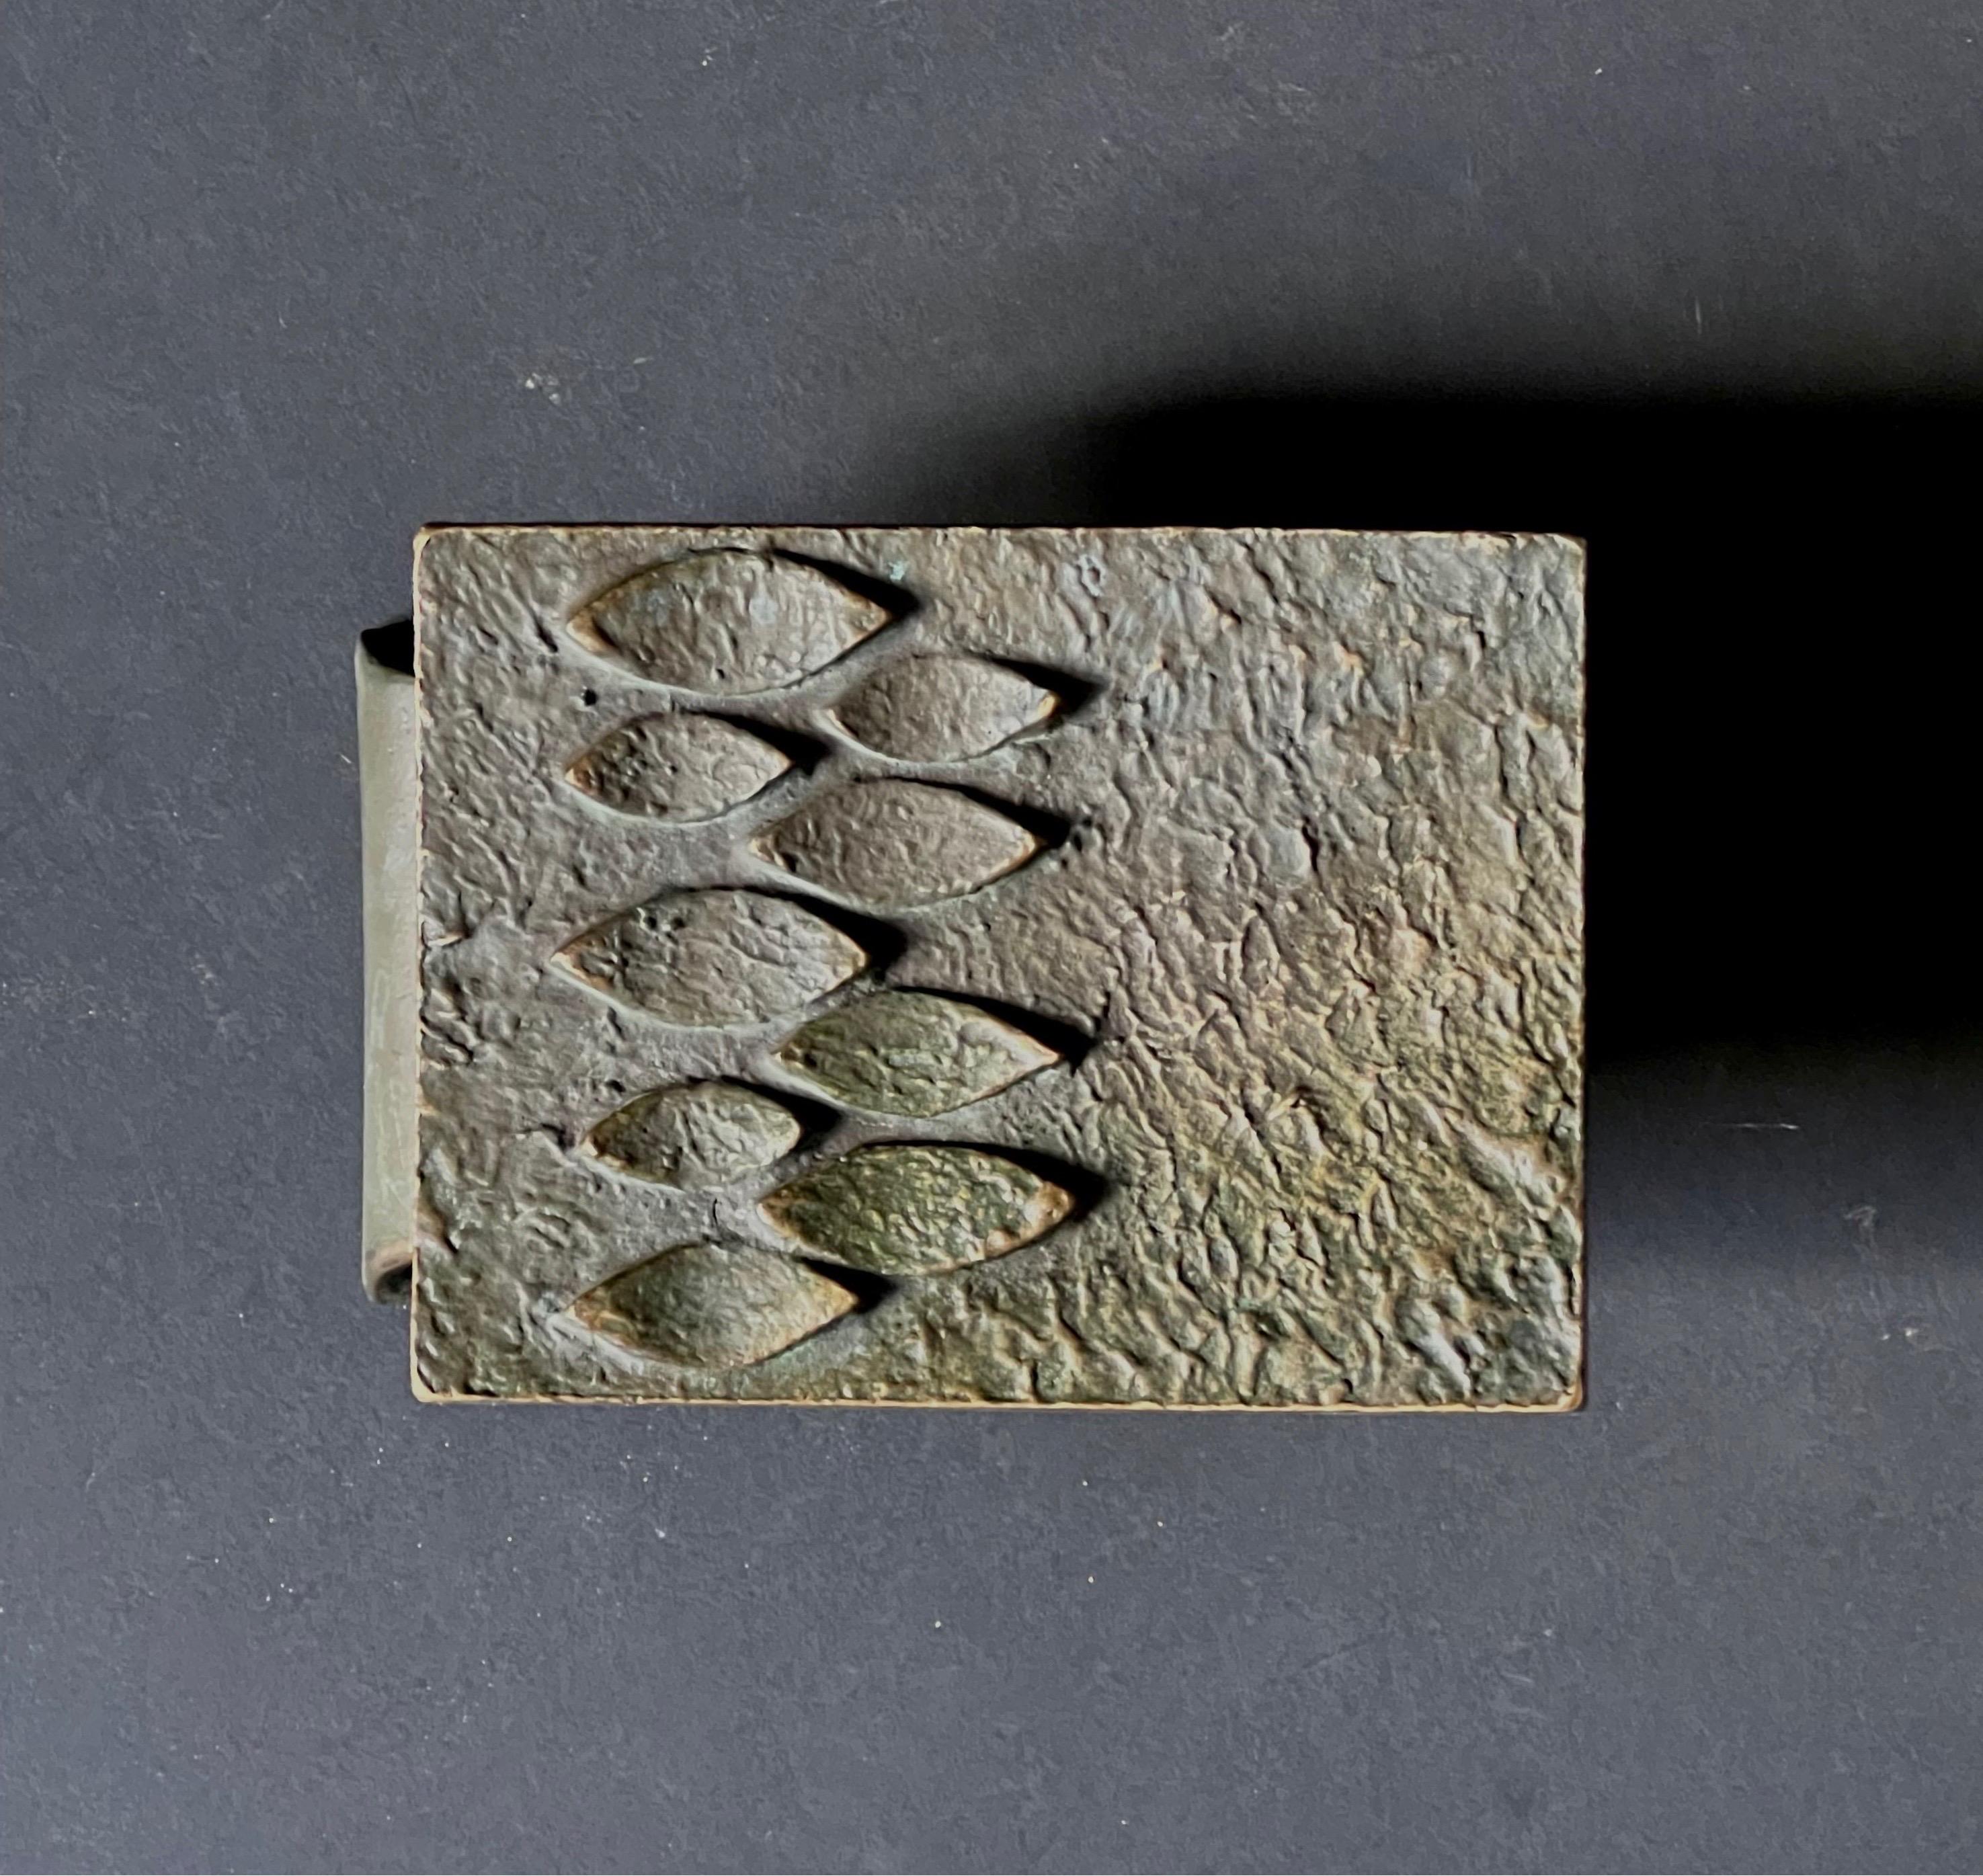 A lateral bronze push or pull door handle with an abstract organic design on a concave plate. Mid-late 20th century, European.

The handle is in good vintage condition, and the metal has a dark patina, with oxidation and signs of wear in line with